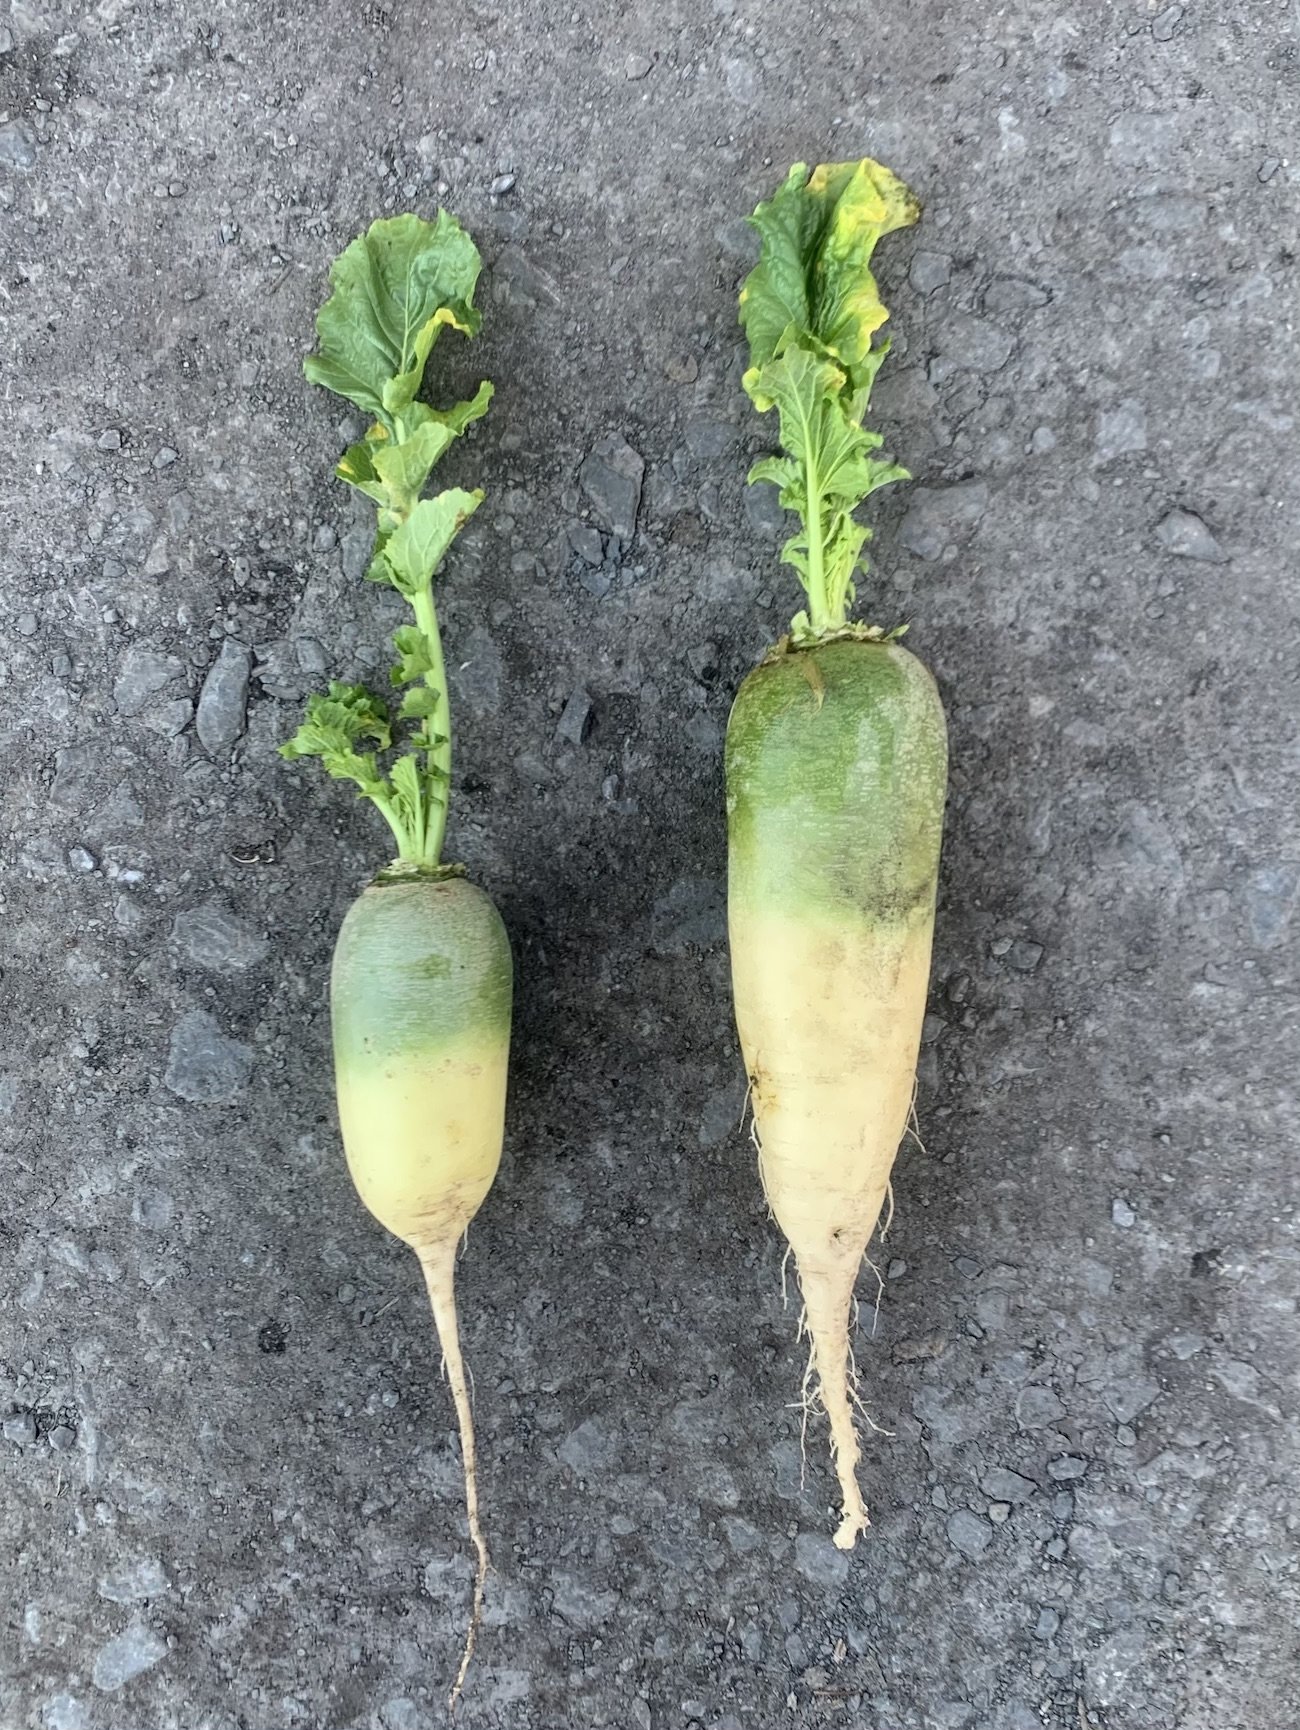 difference in size between radish that hasn't been thinned vs radish given more room